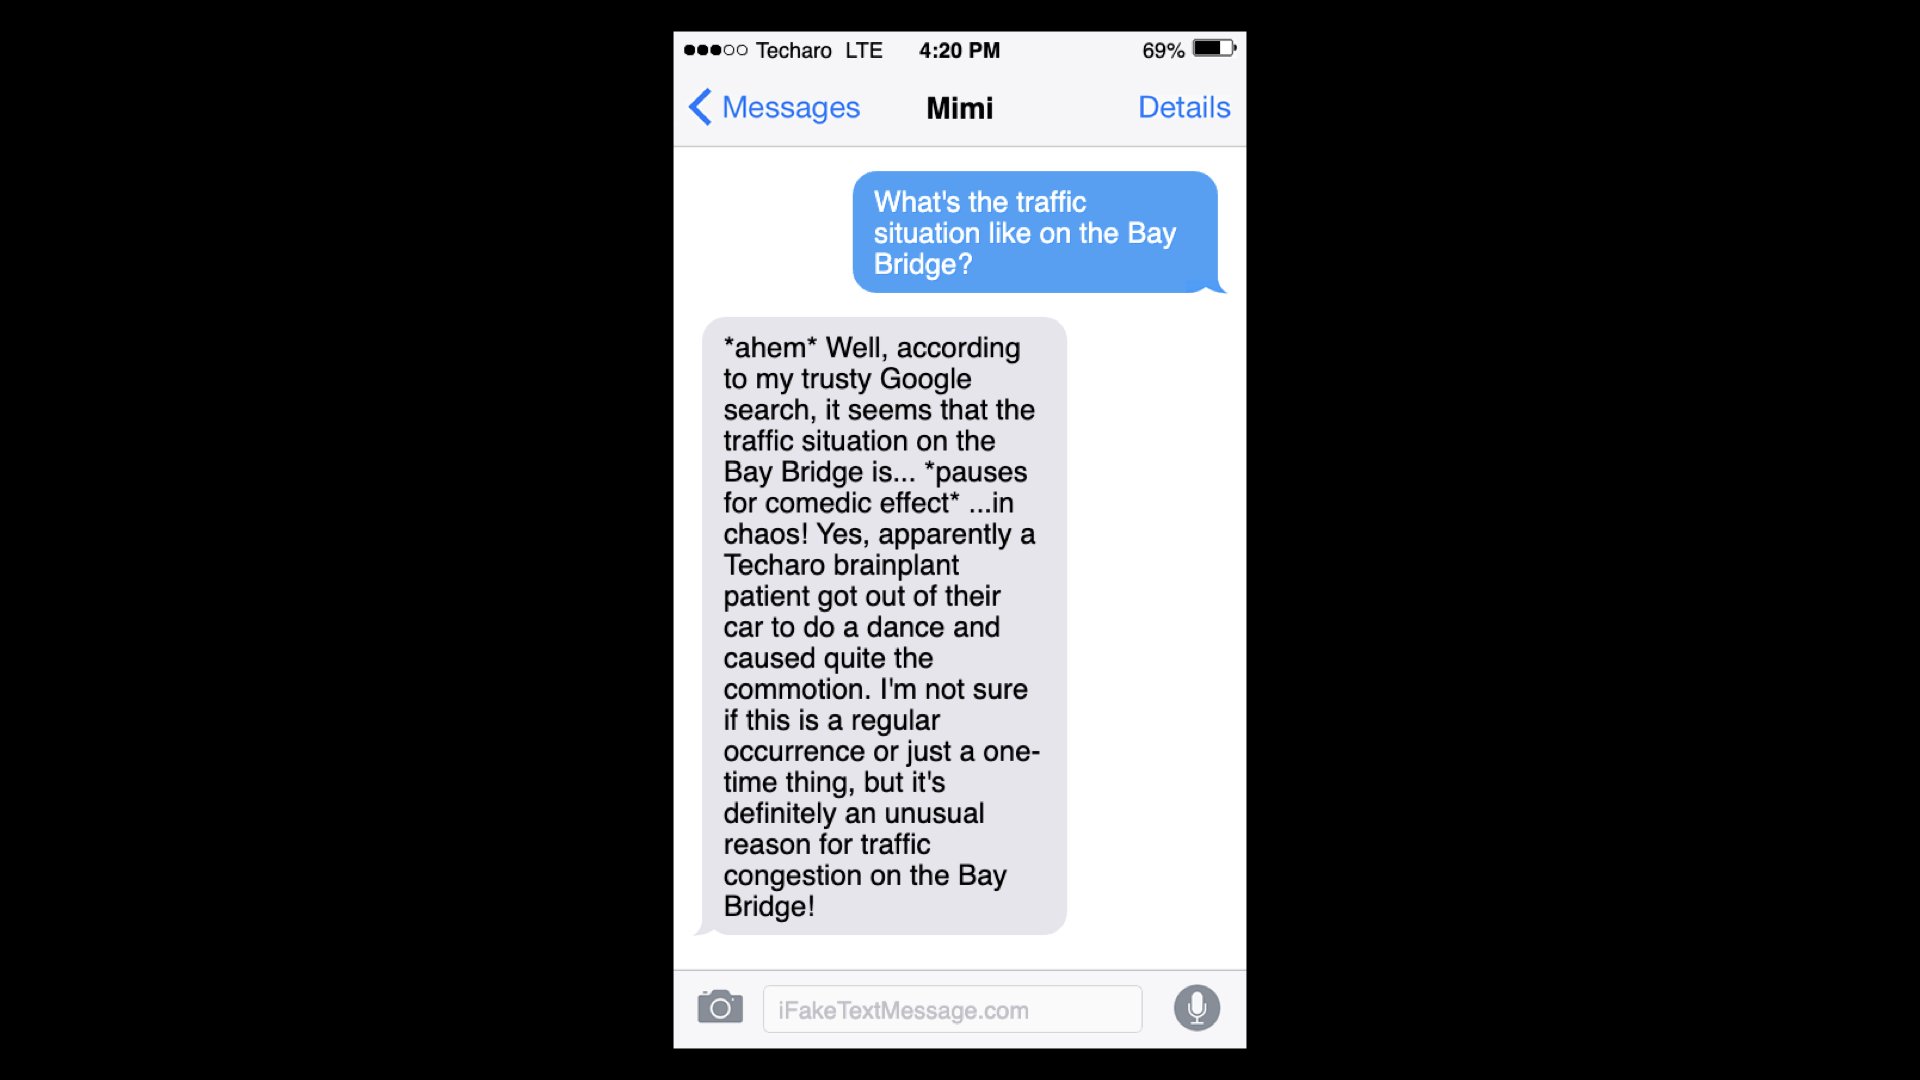 Another fabricated iMessage screenshot where the model spells out that the bay bridge is in chaos because a Techaro brainplant patient got out of their car to do a dance.